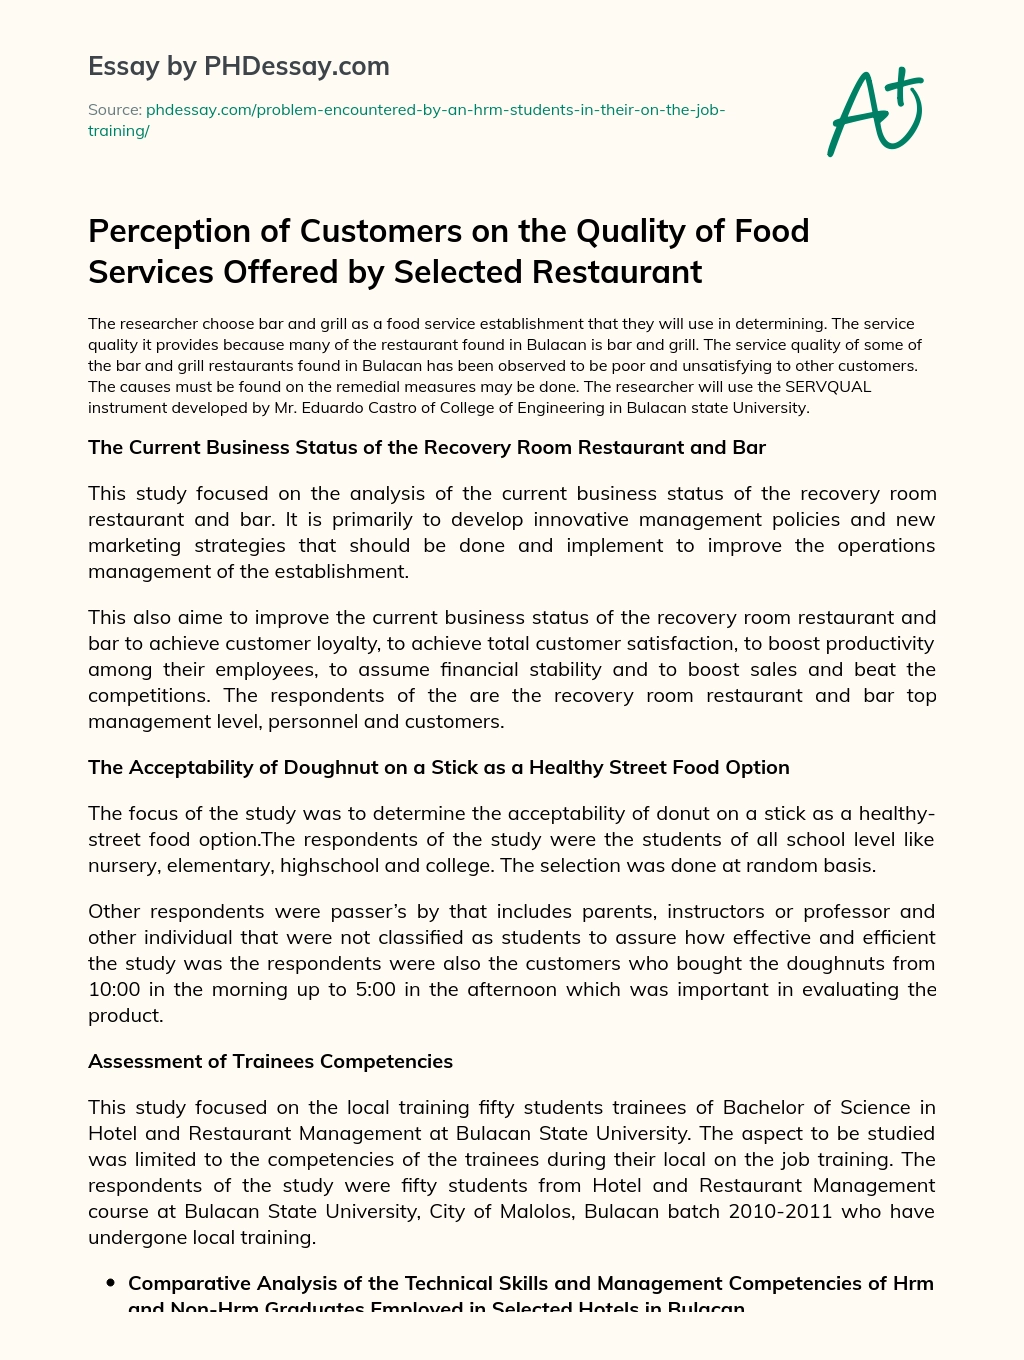 Perception of Customers on the Quality of Food Services Offered by Selected Restaurant essay